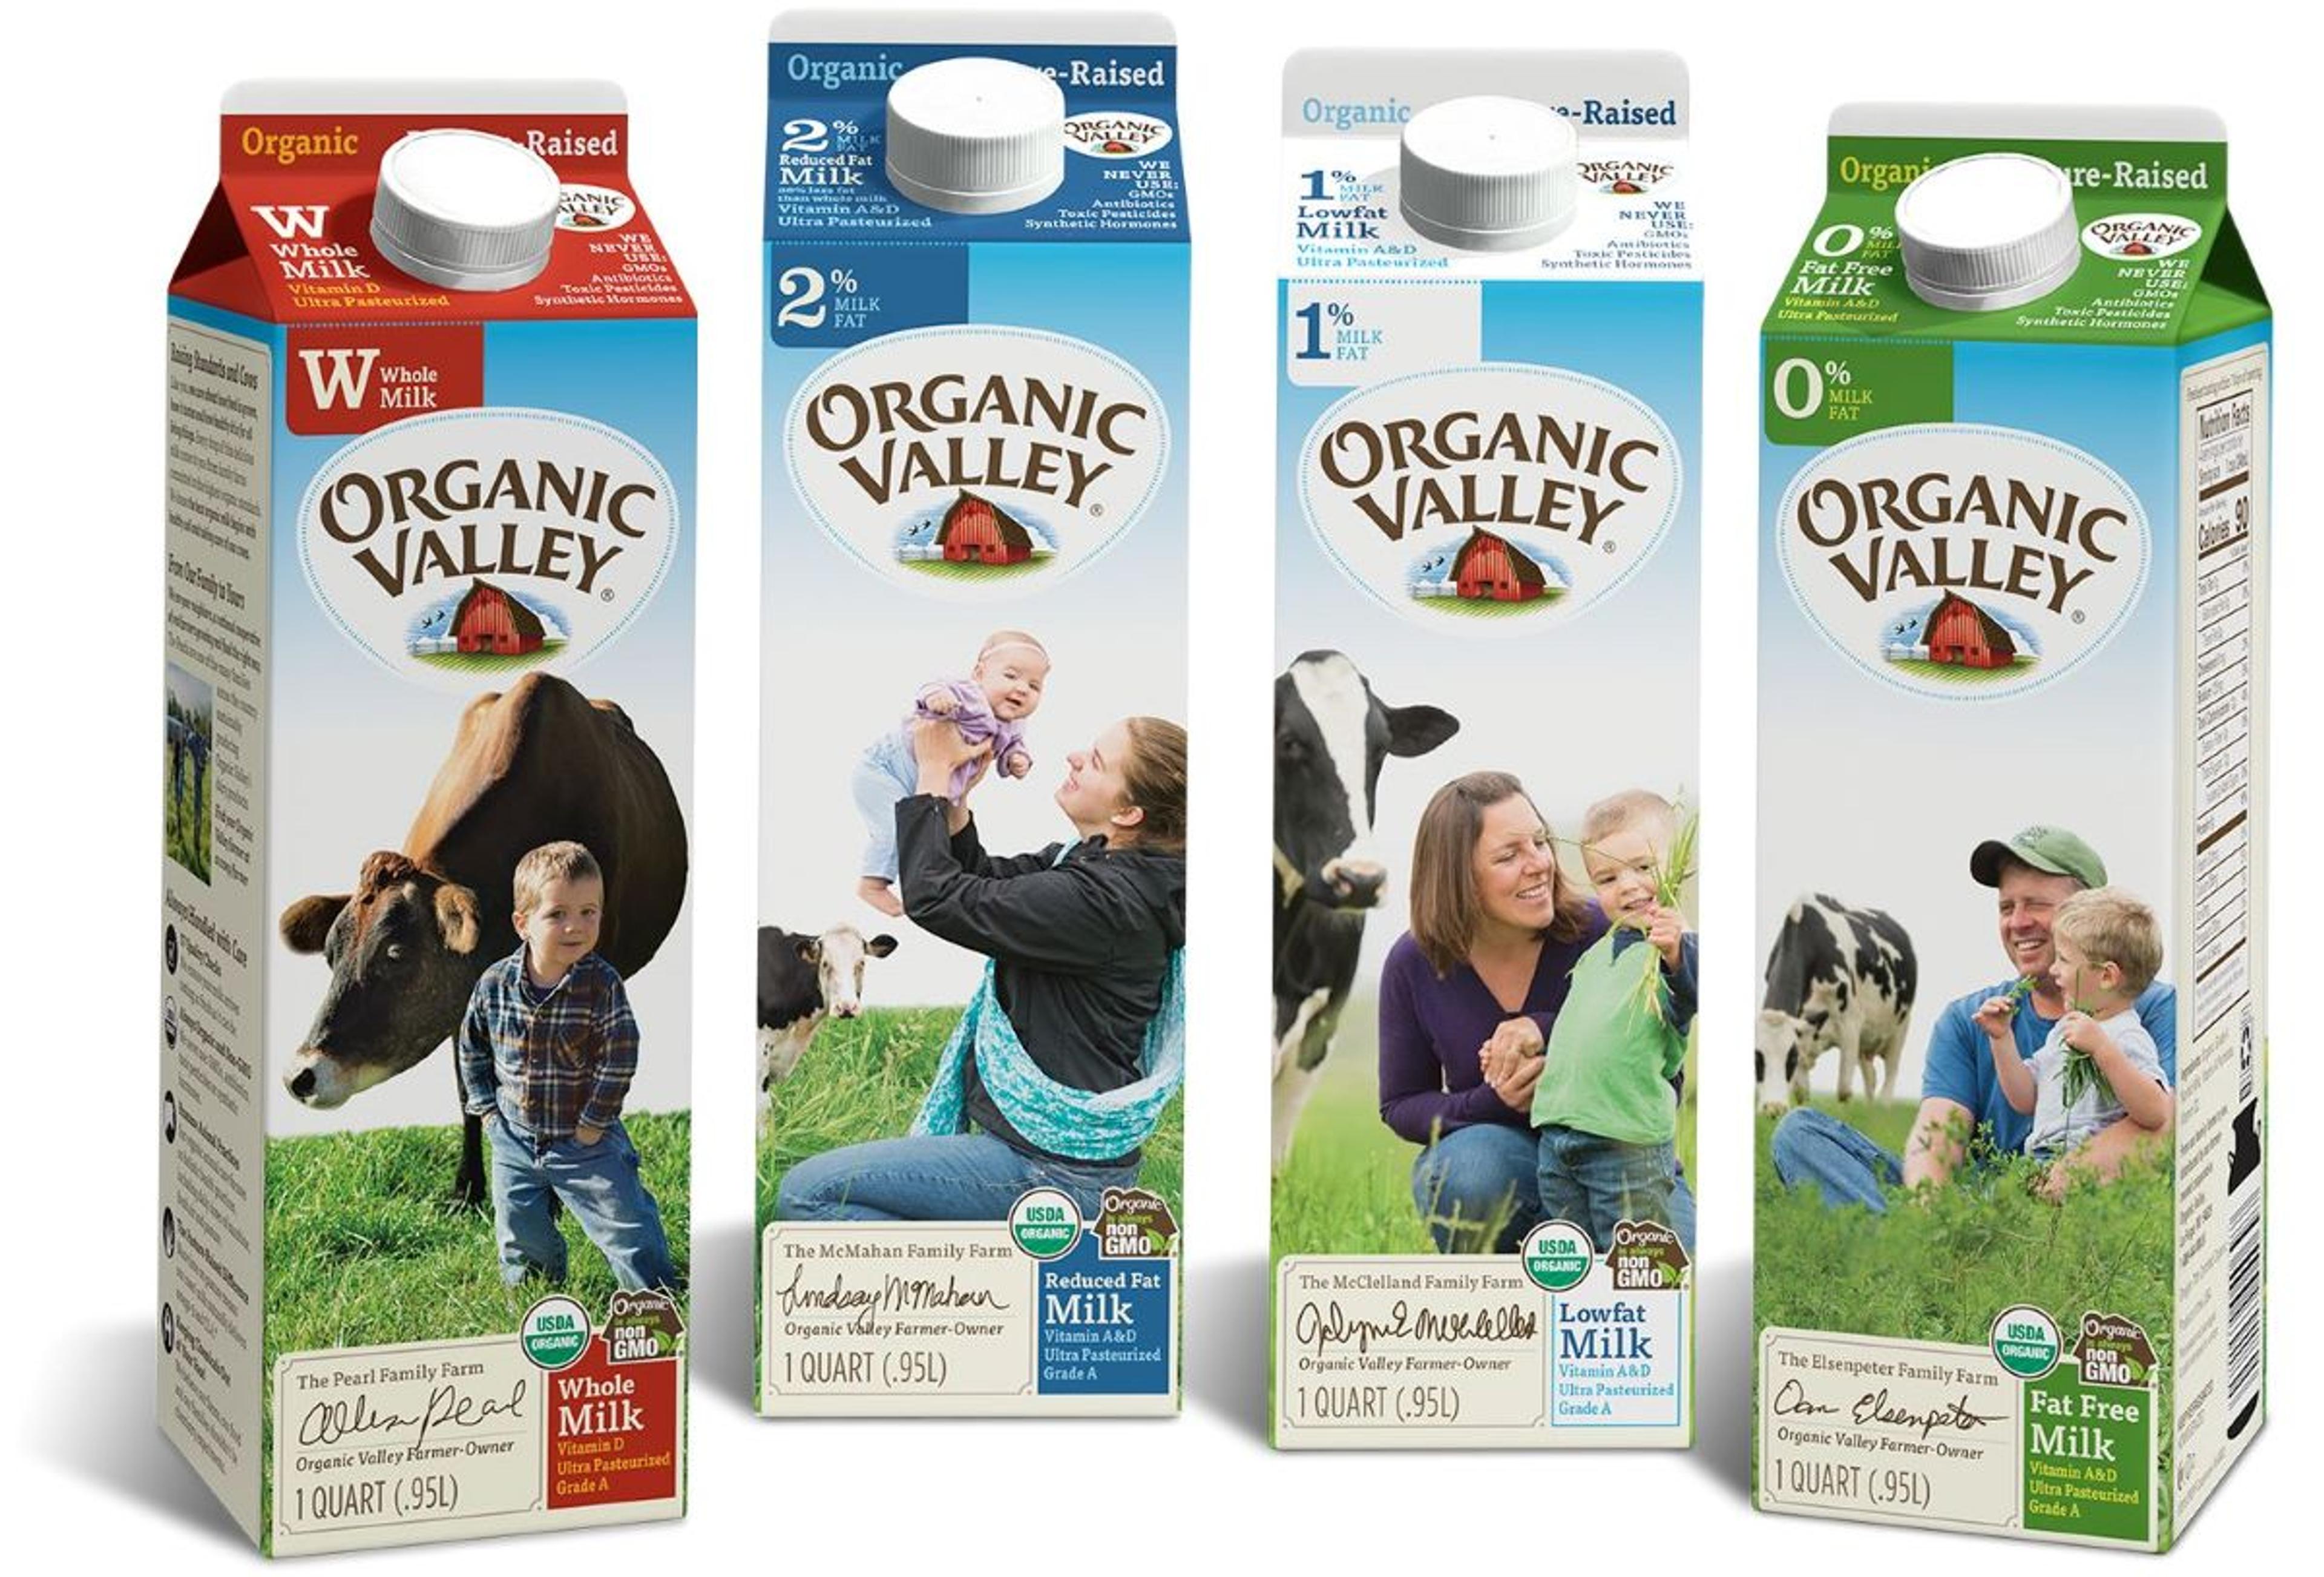 Organic Valley milk products